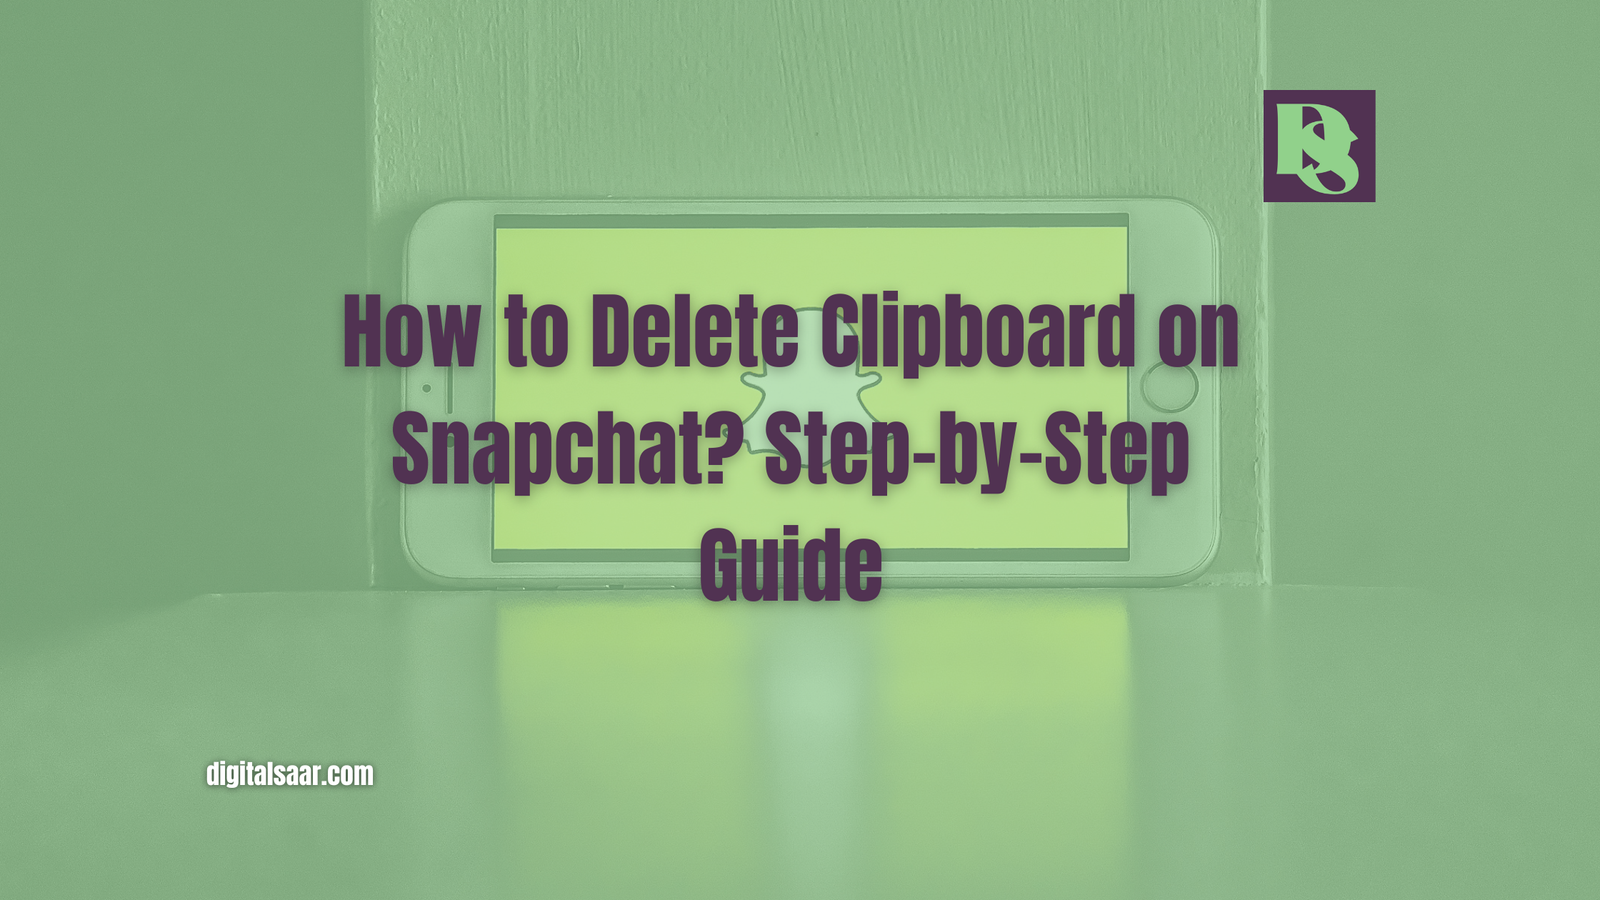 How to Delete Clipboard on Snapchat